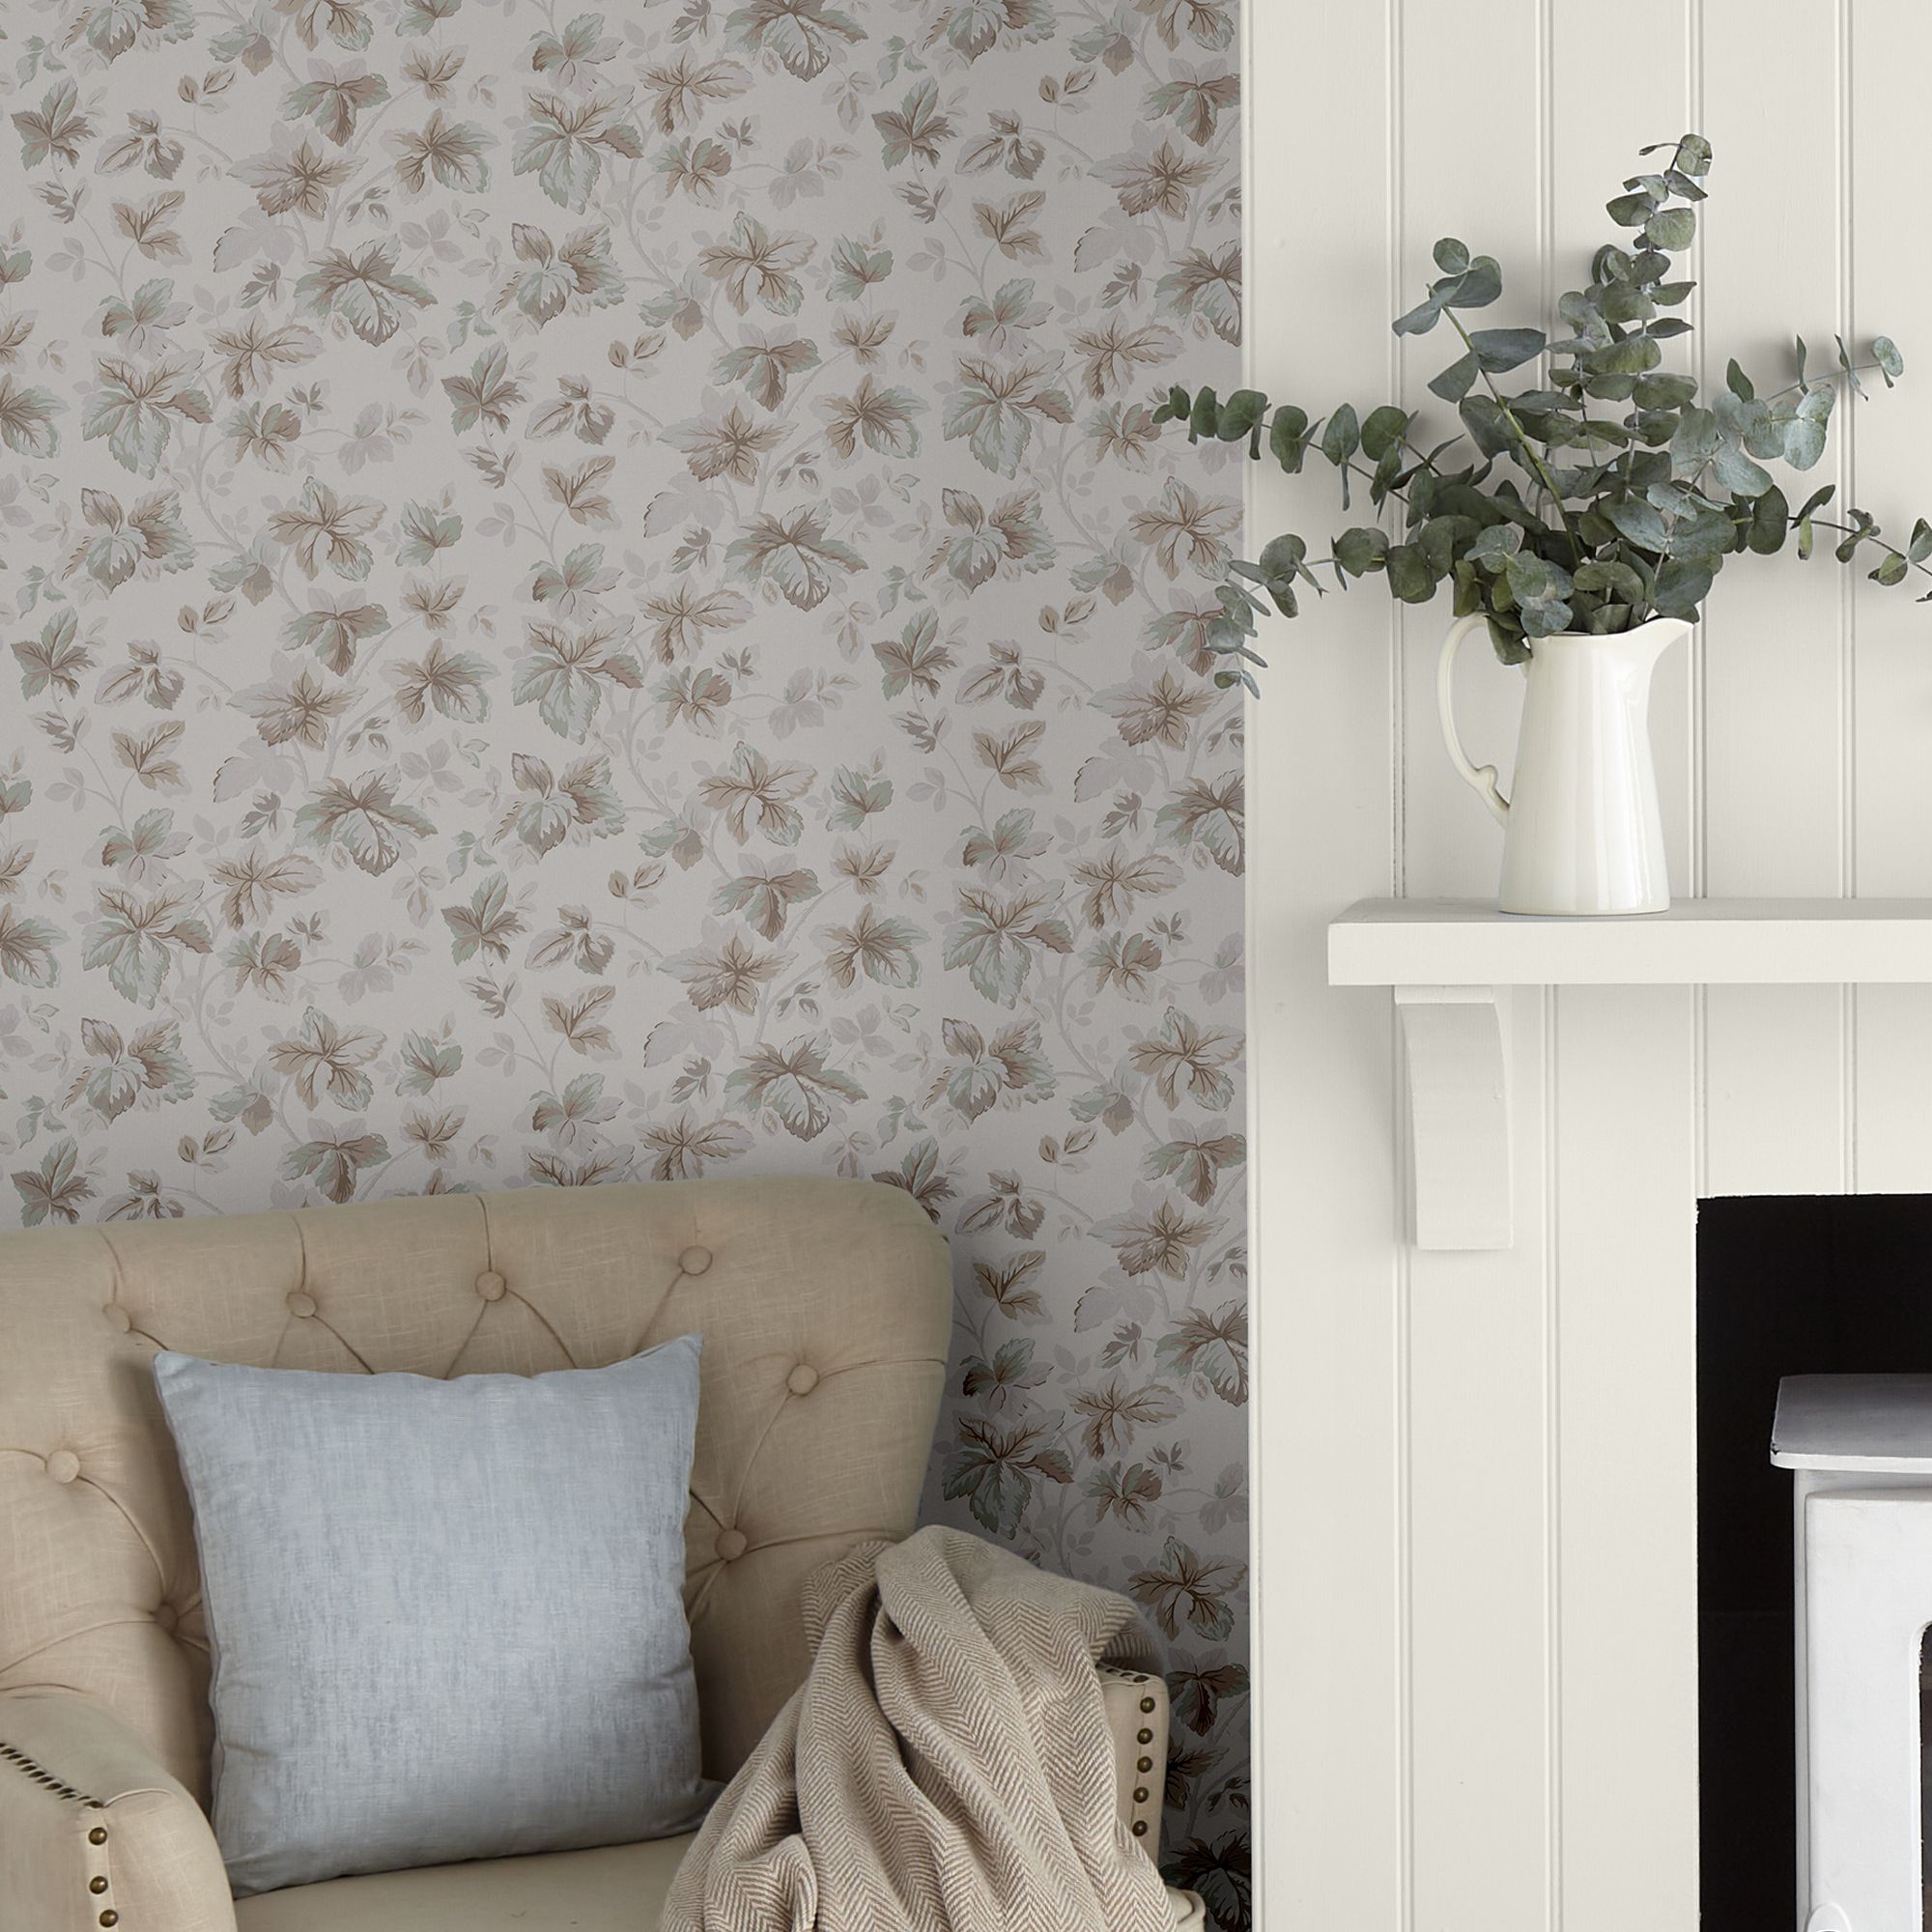 Laura Ashley Autumn Leaves Natural Leaves Smooth Wallpaper